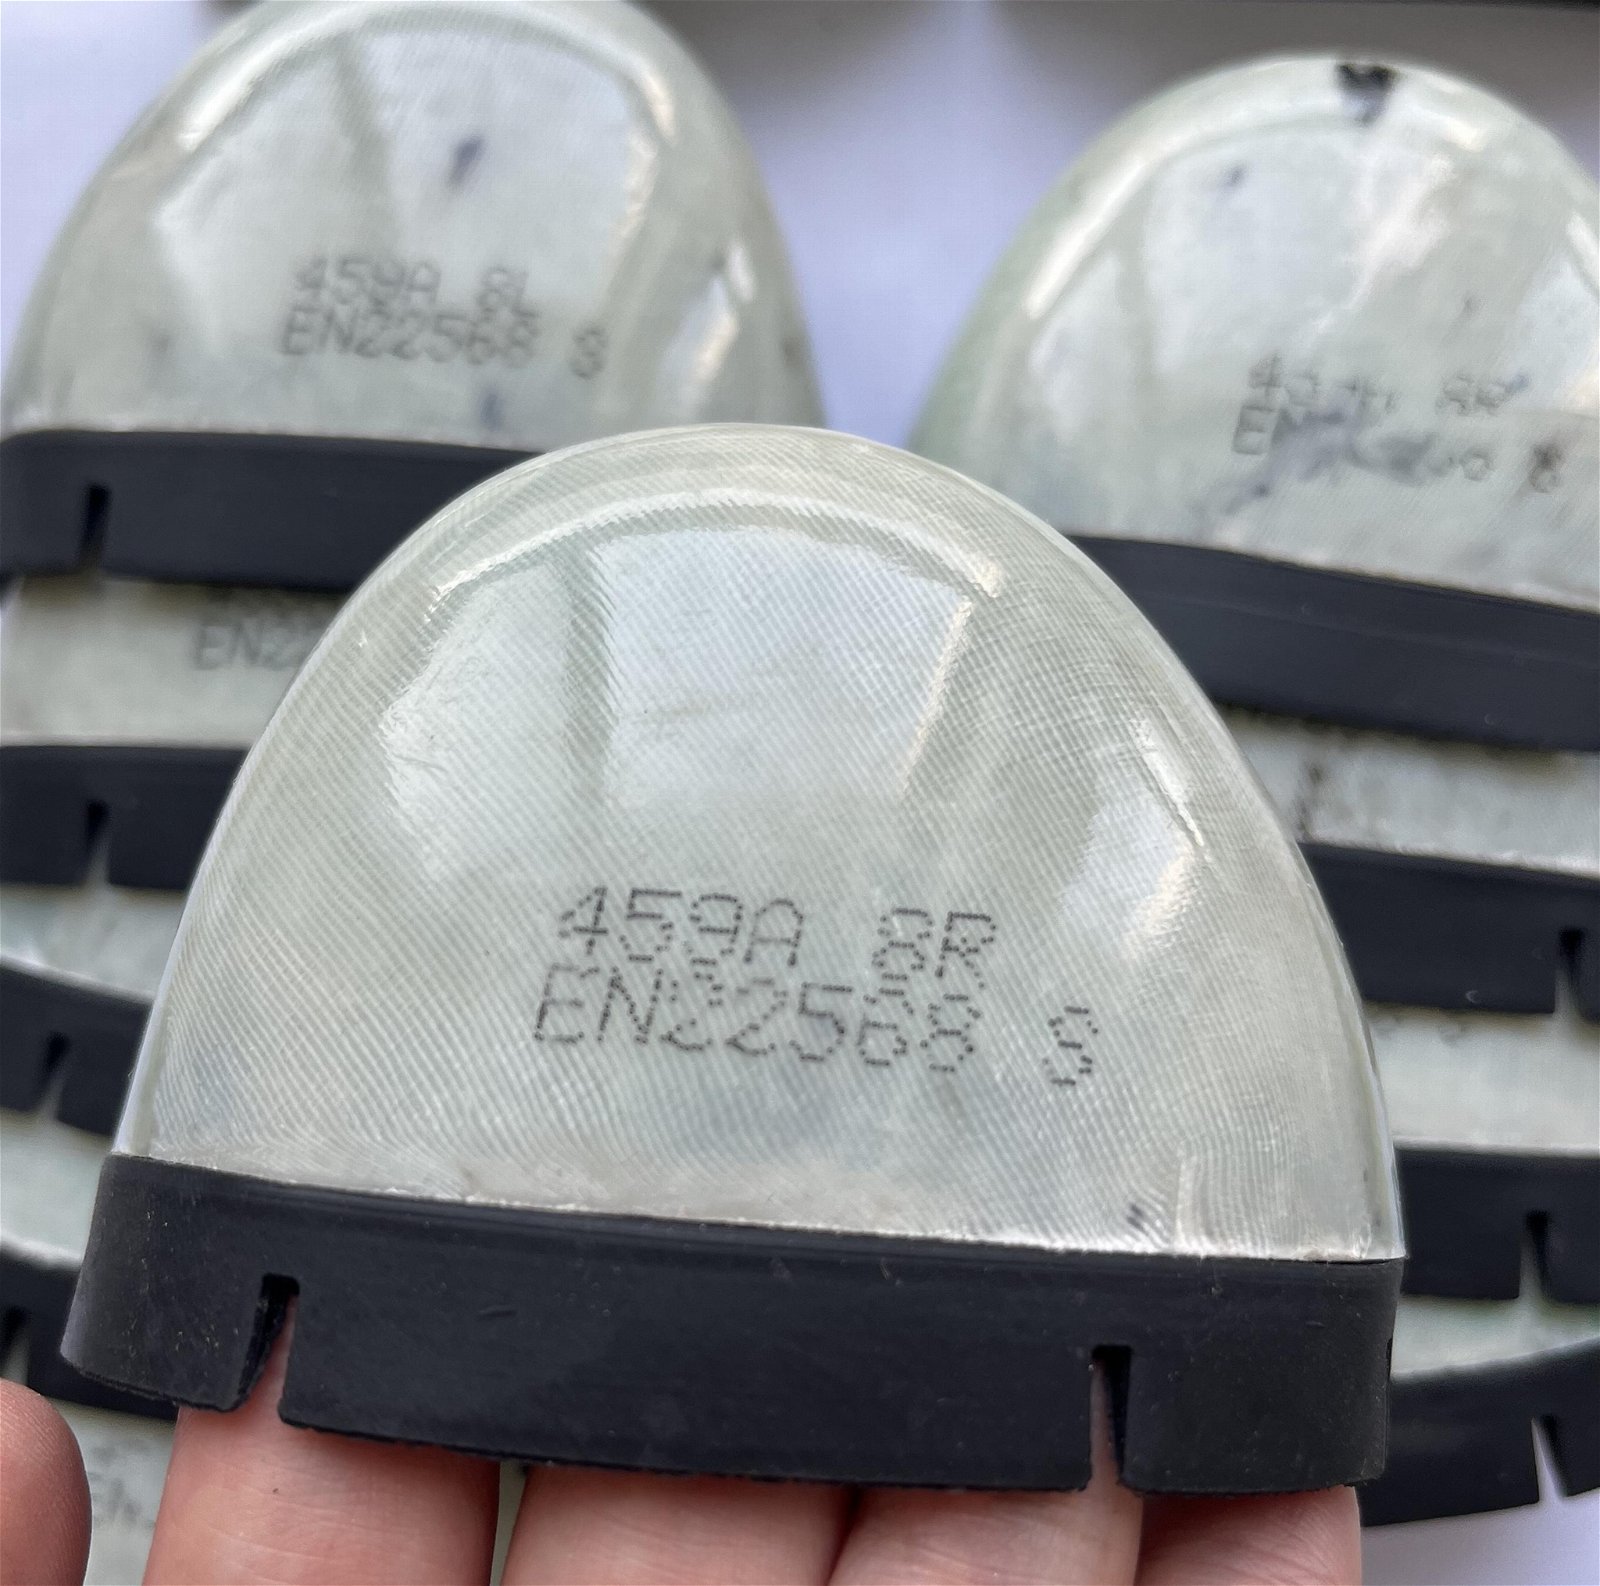 COMPOSITE TOE CAPS FOR SAFETY SHOES 2